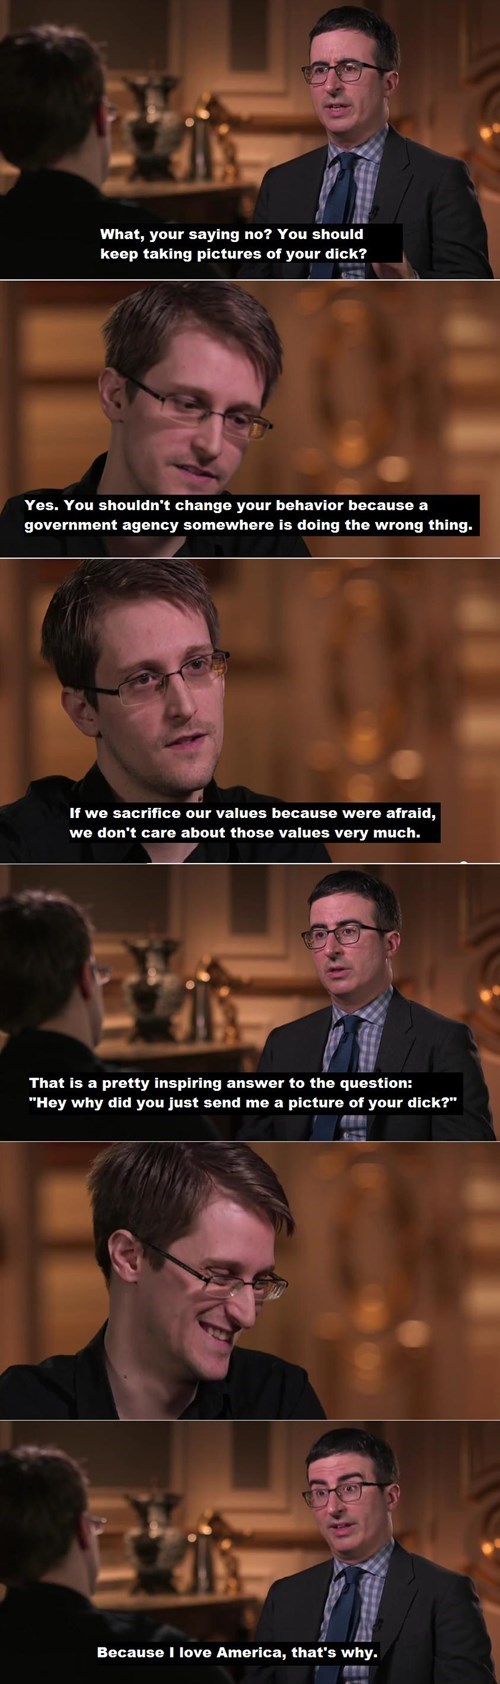 edward snowden knows about sexy pics